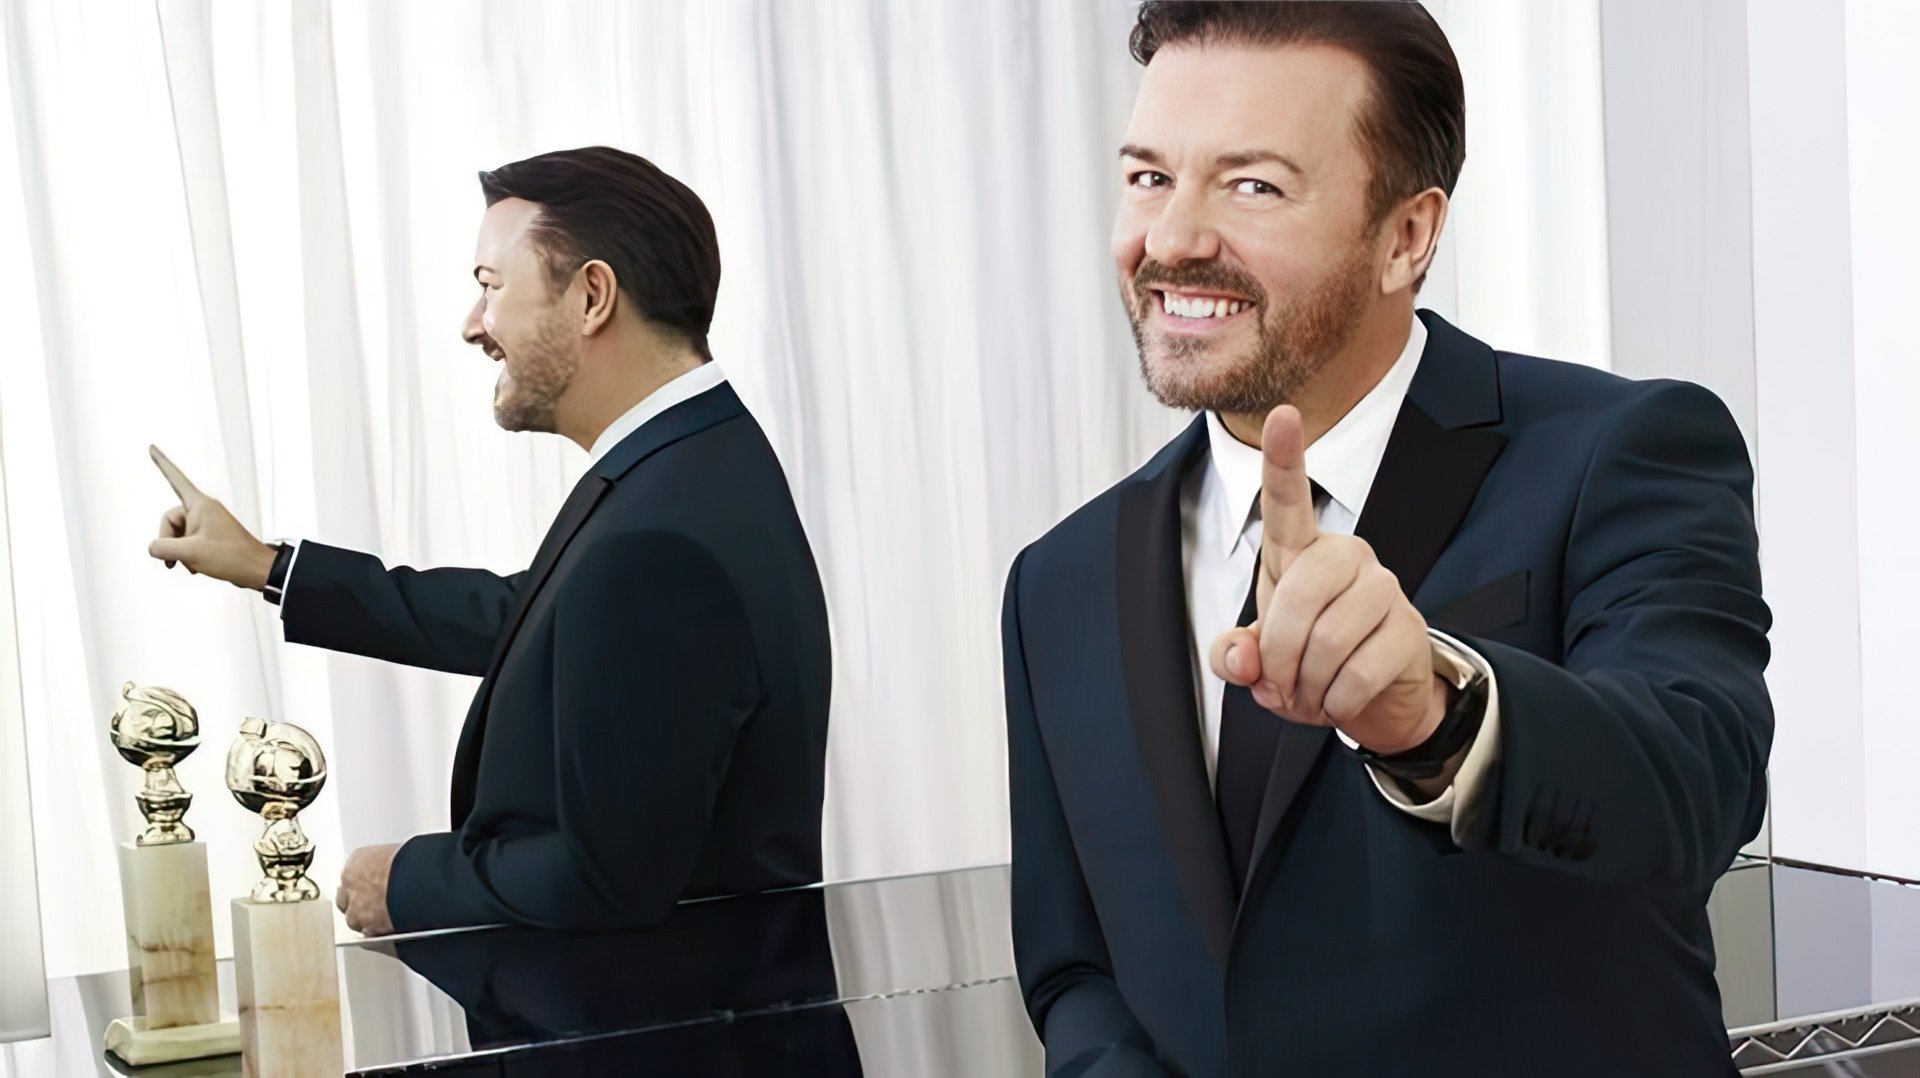 Ricky Gervais has collected countless awards over the years